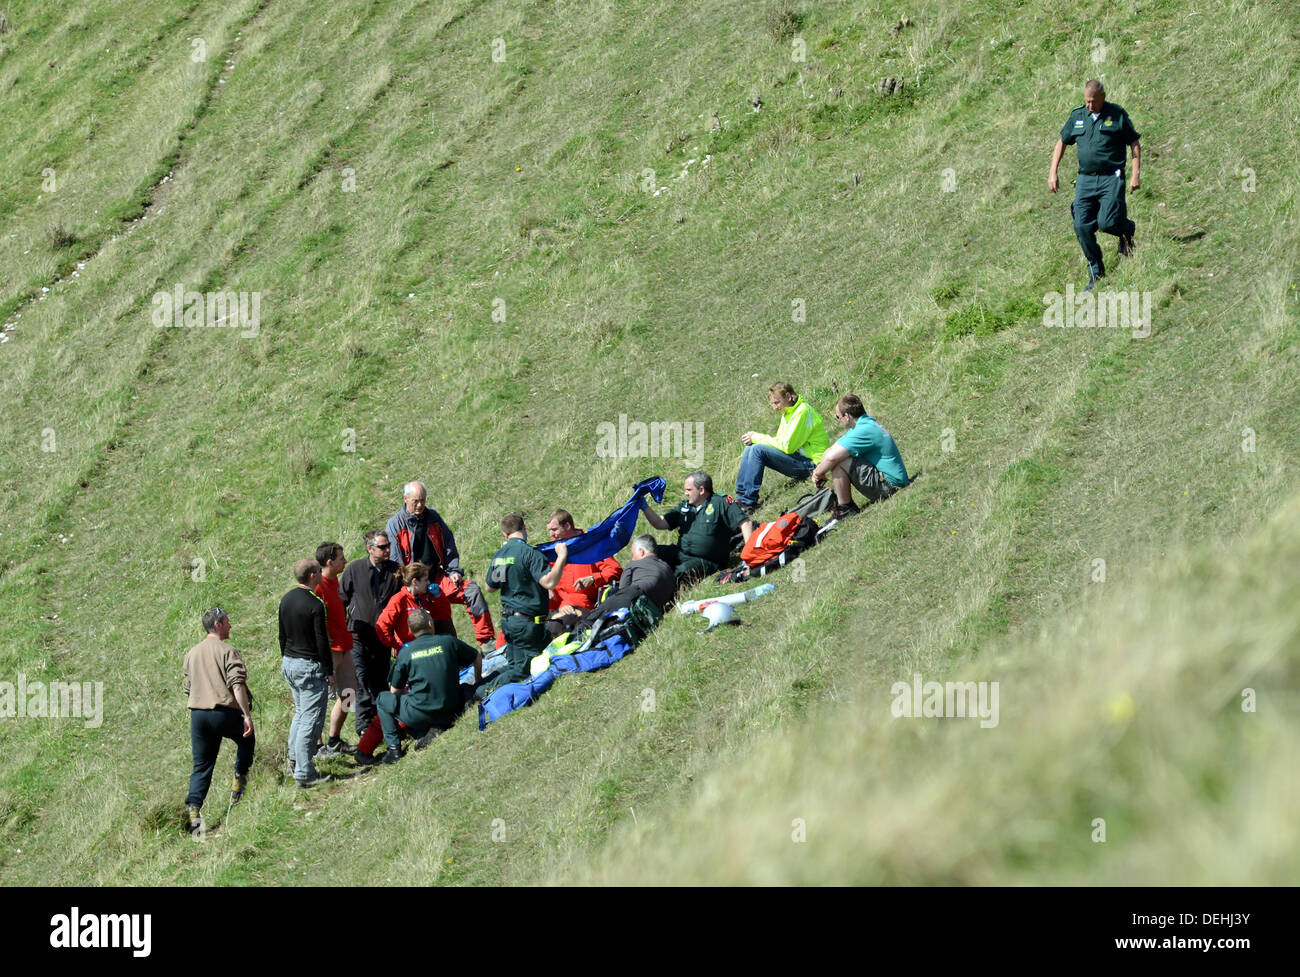 Kent Air Ambulance attending the scene of a paraglider crash, Mount Caburn, Lewes East Sussex Stock Photo